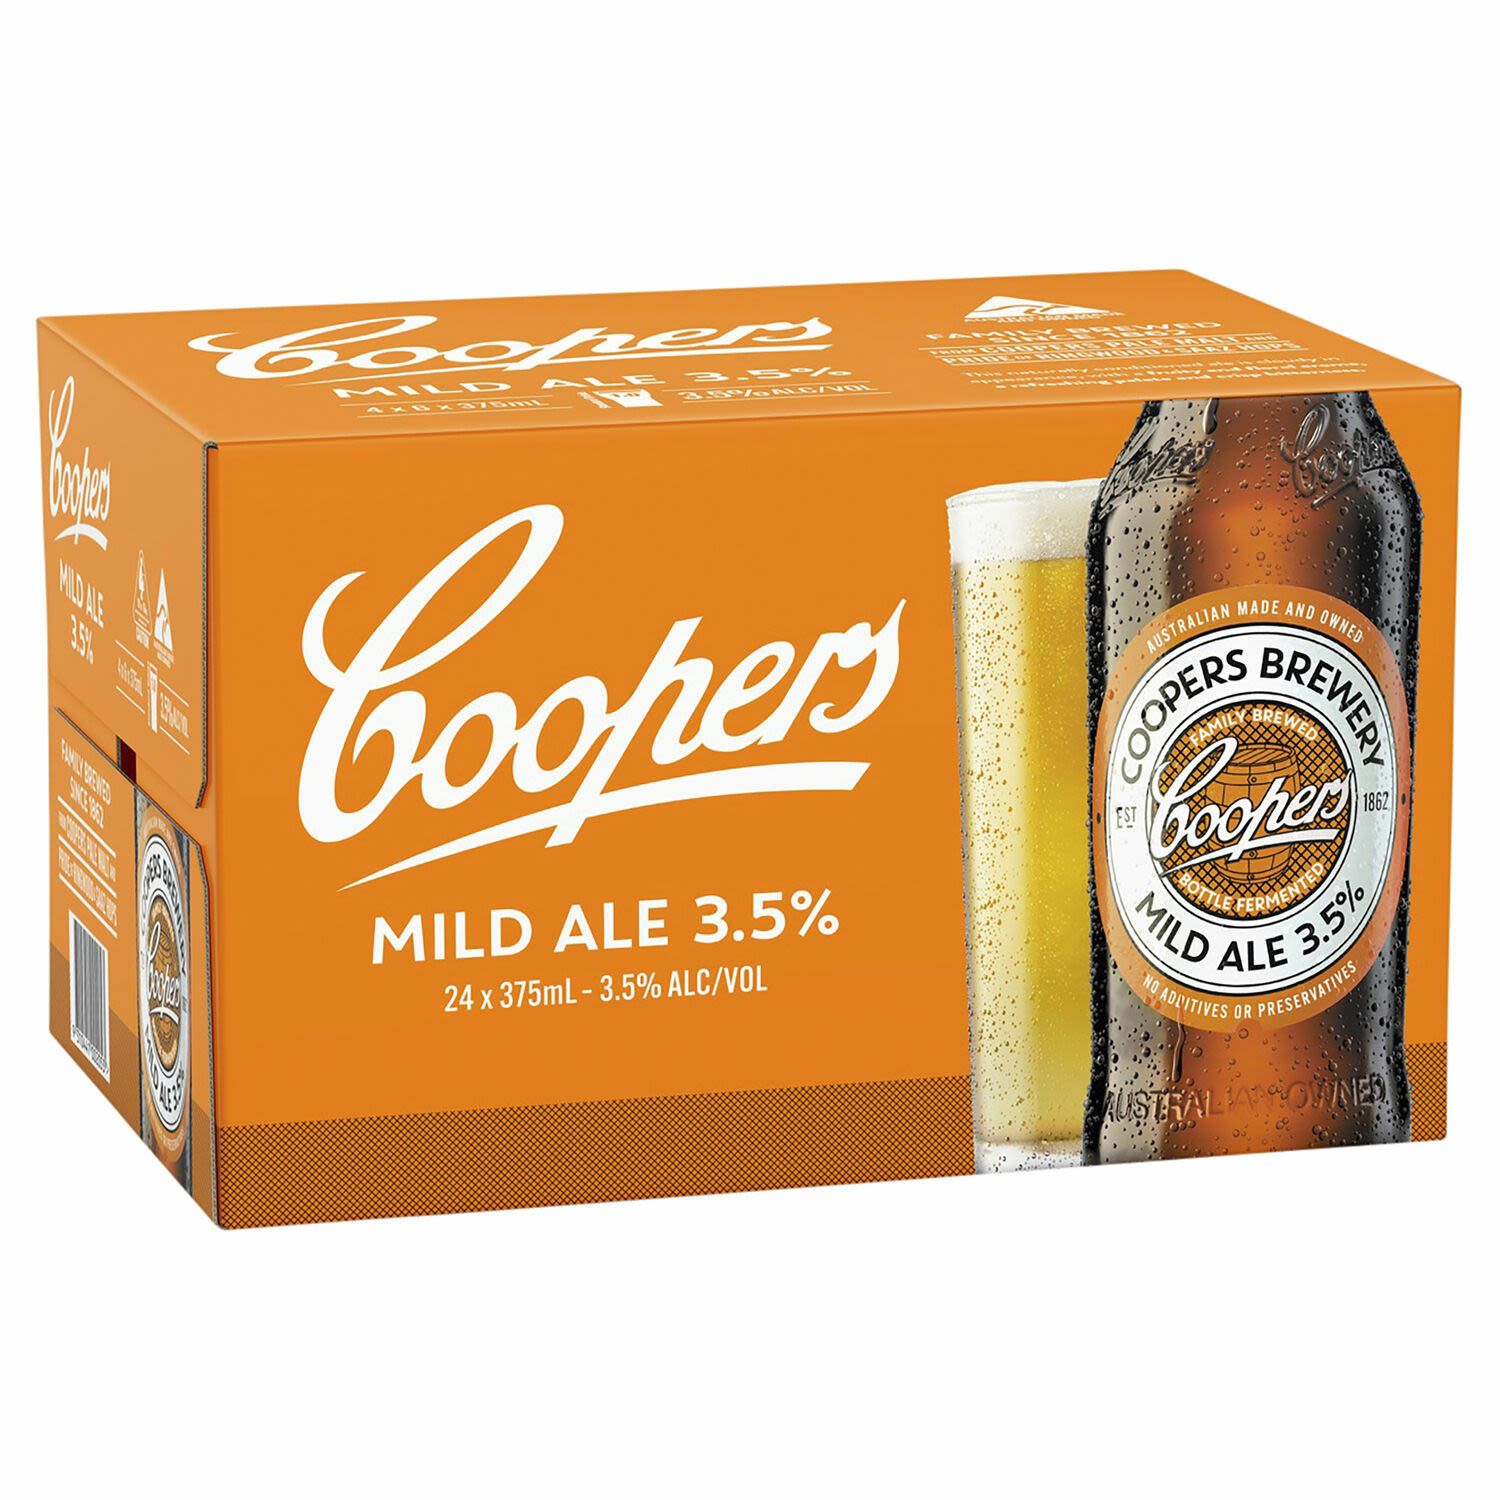 Coopers Mild Ale Bottle 375mL 24 Pack